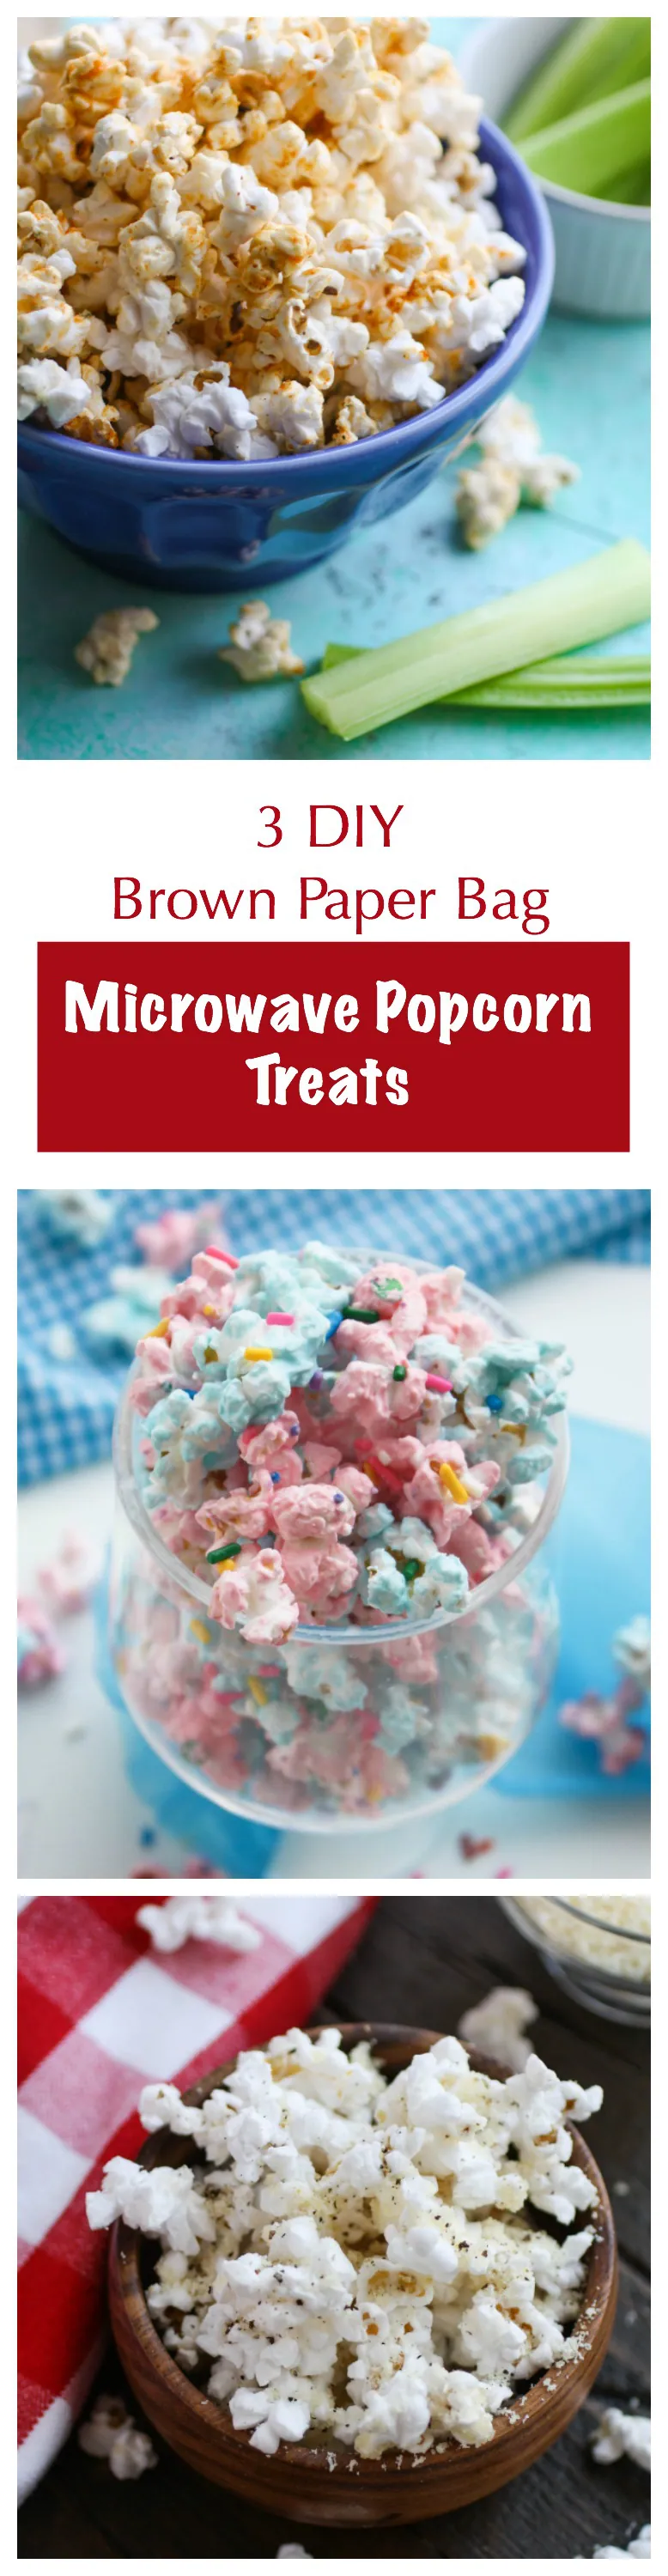 3 DIY Brown Paper Bag Microwave Popcorn Treats offer something for everyone! You'll love the options: sweet, salty, and spicy for fun sancking!